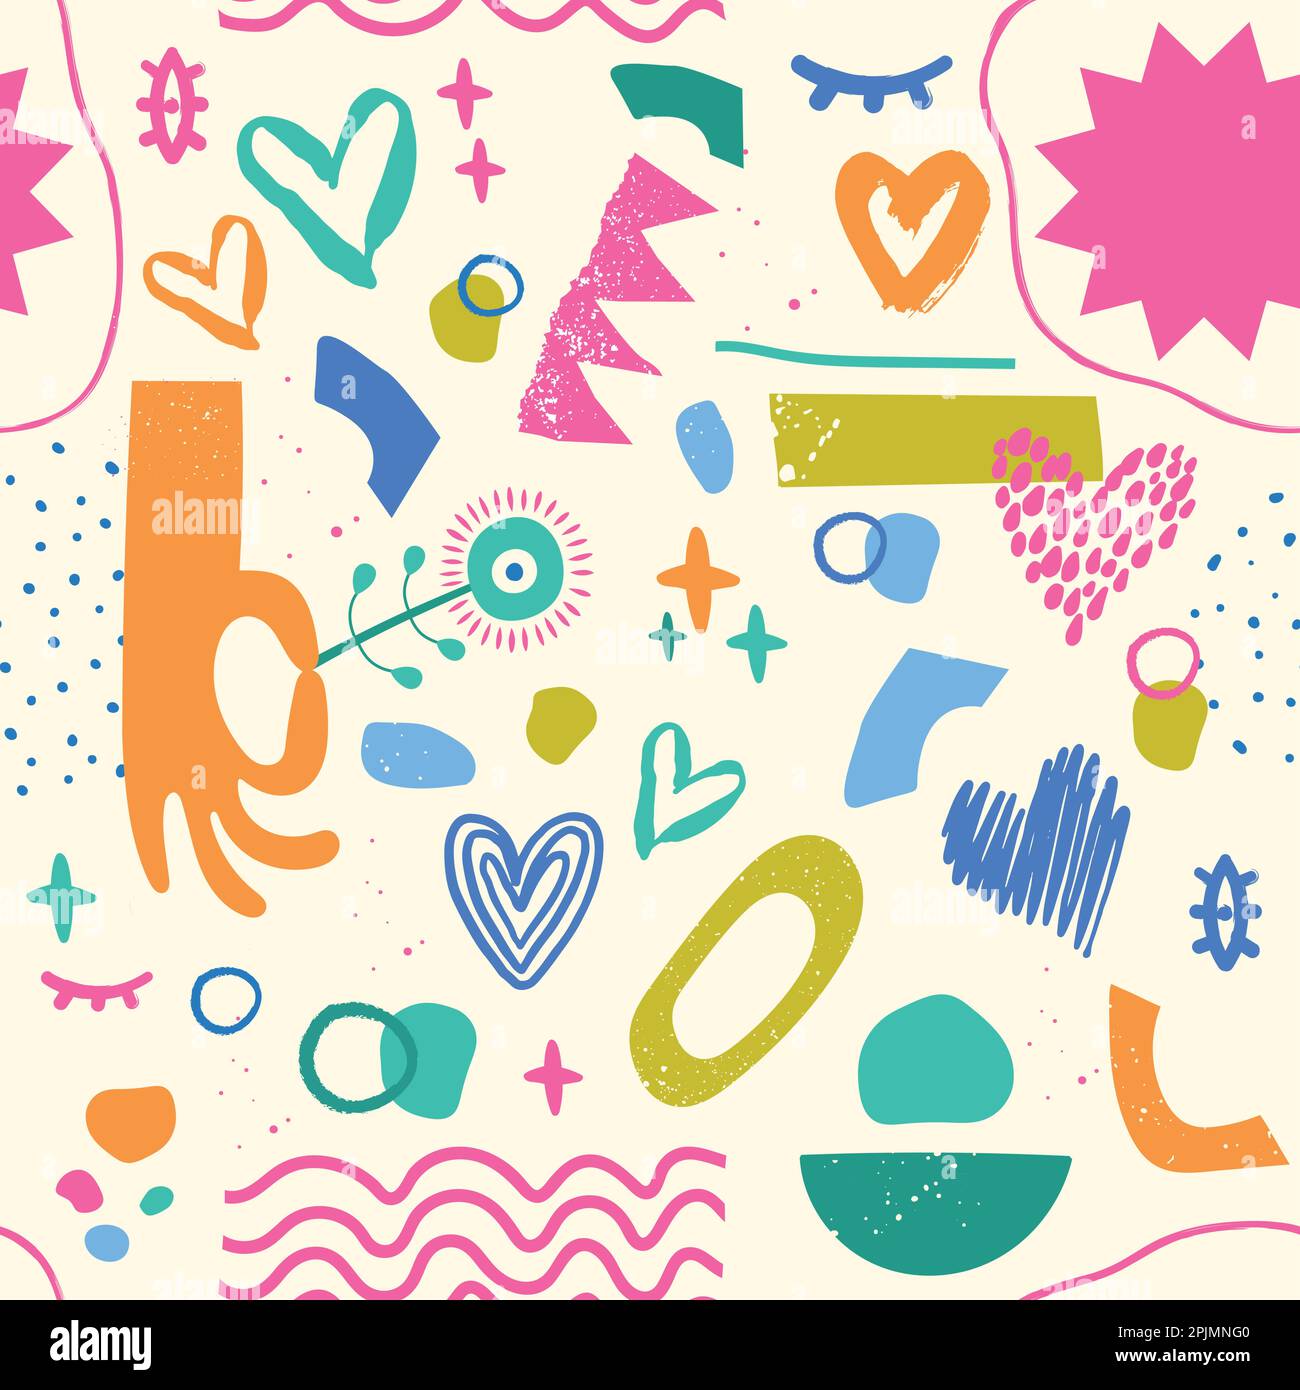 Vector set of linear fun patches,stickers,geometric shapes in 90s